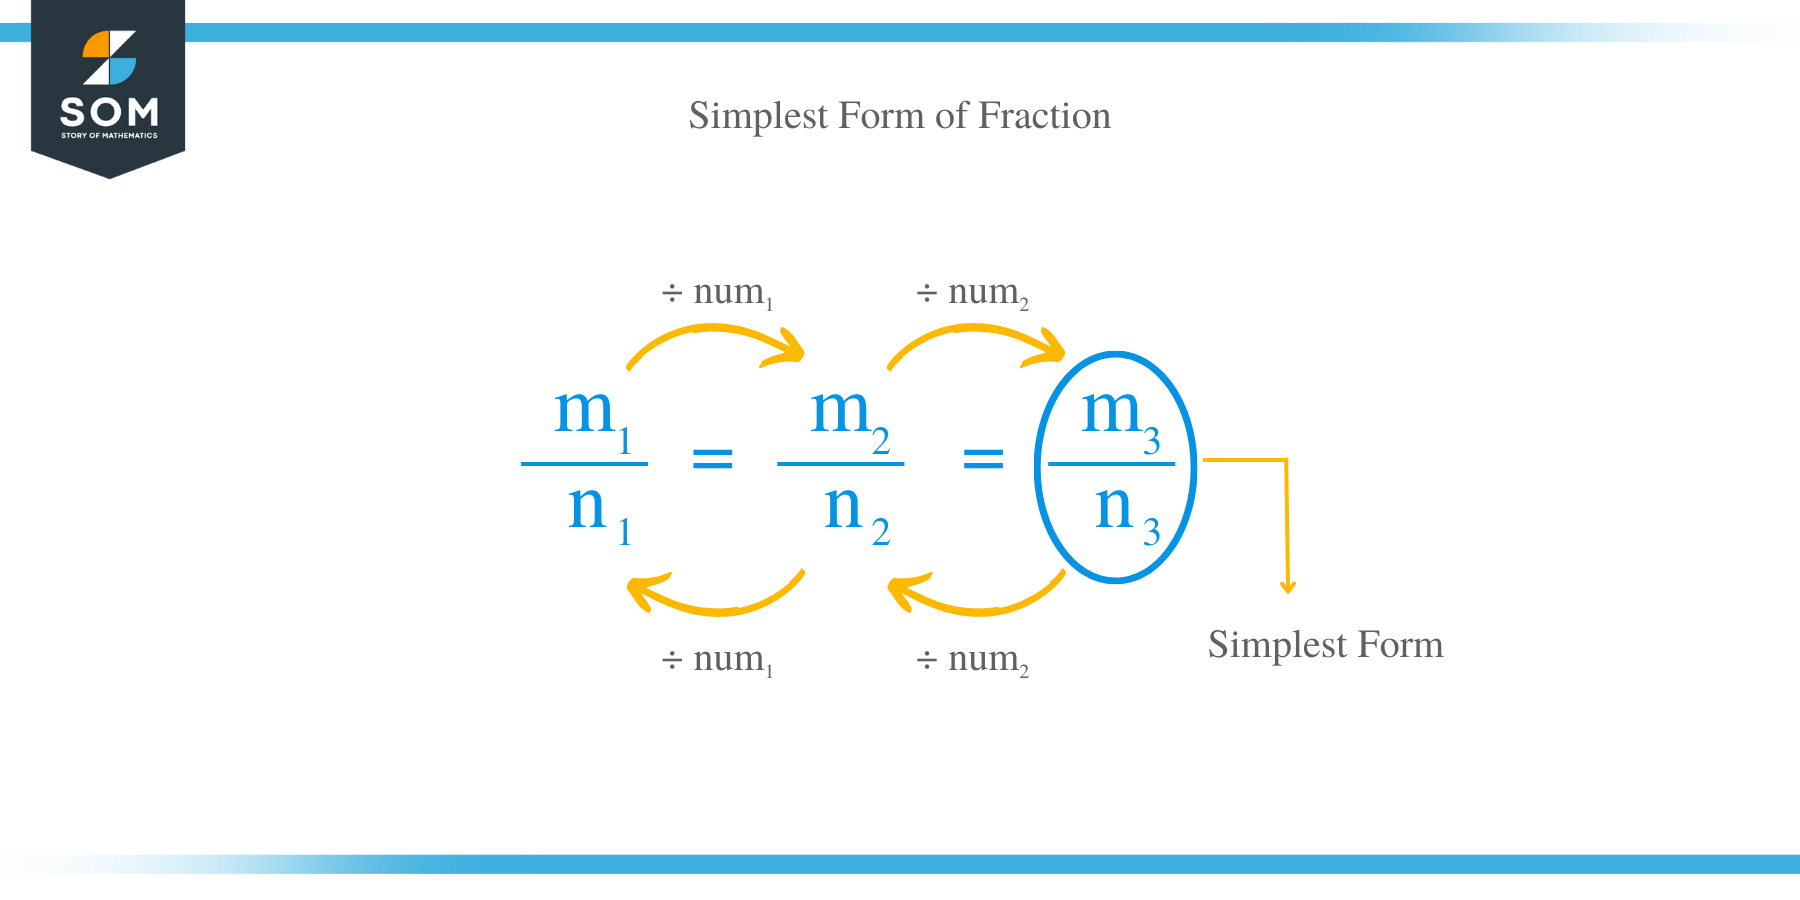 How to Simplify Fractions?